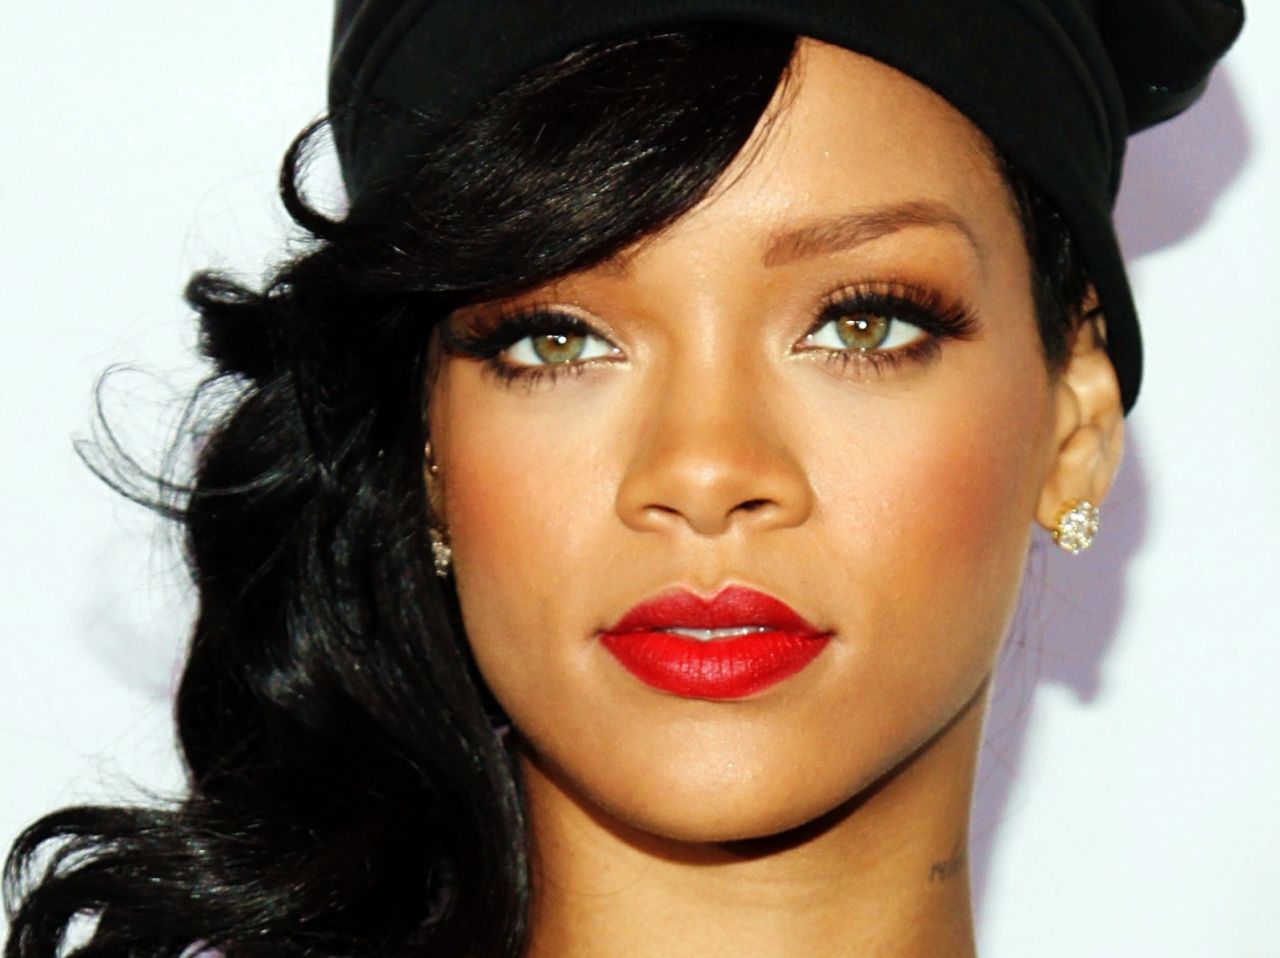 Robyn Rihanna is a Barbadian singer, songwriter, and actress.<br /><br /><a href="http://mipad.org/" target="_blank" target="_blank">See the full list of honorees</a>. 